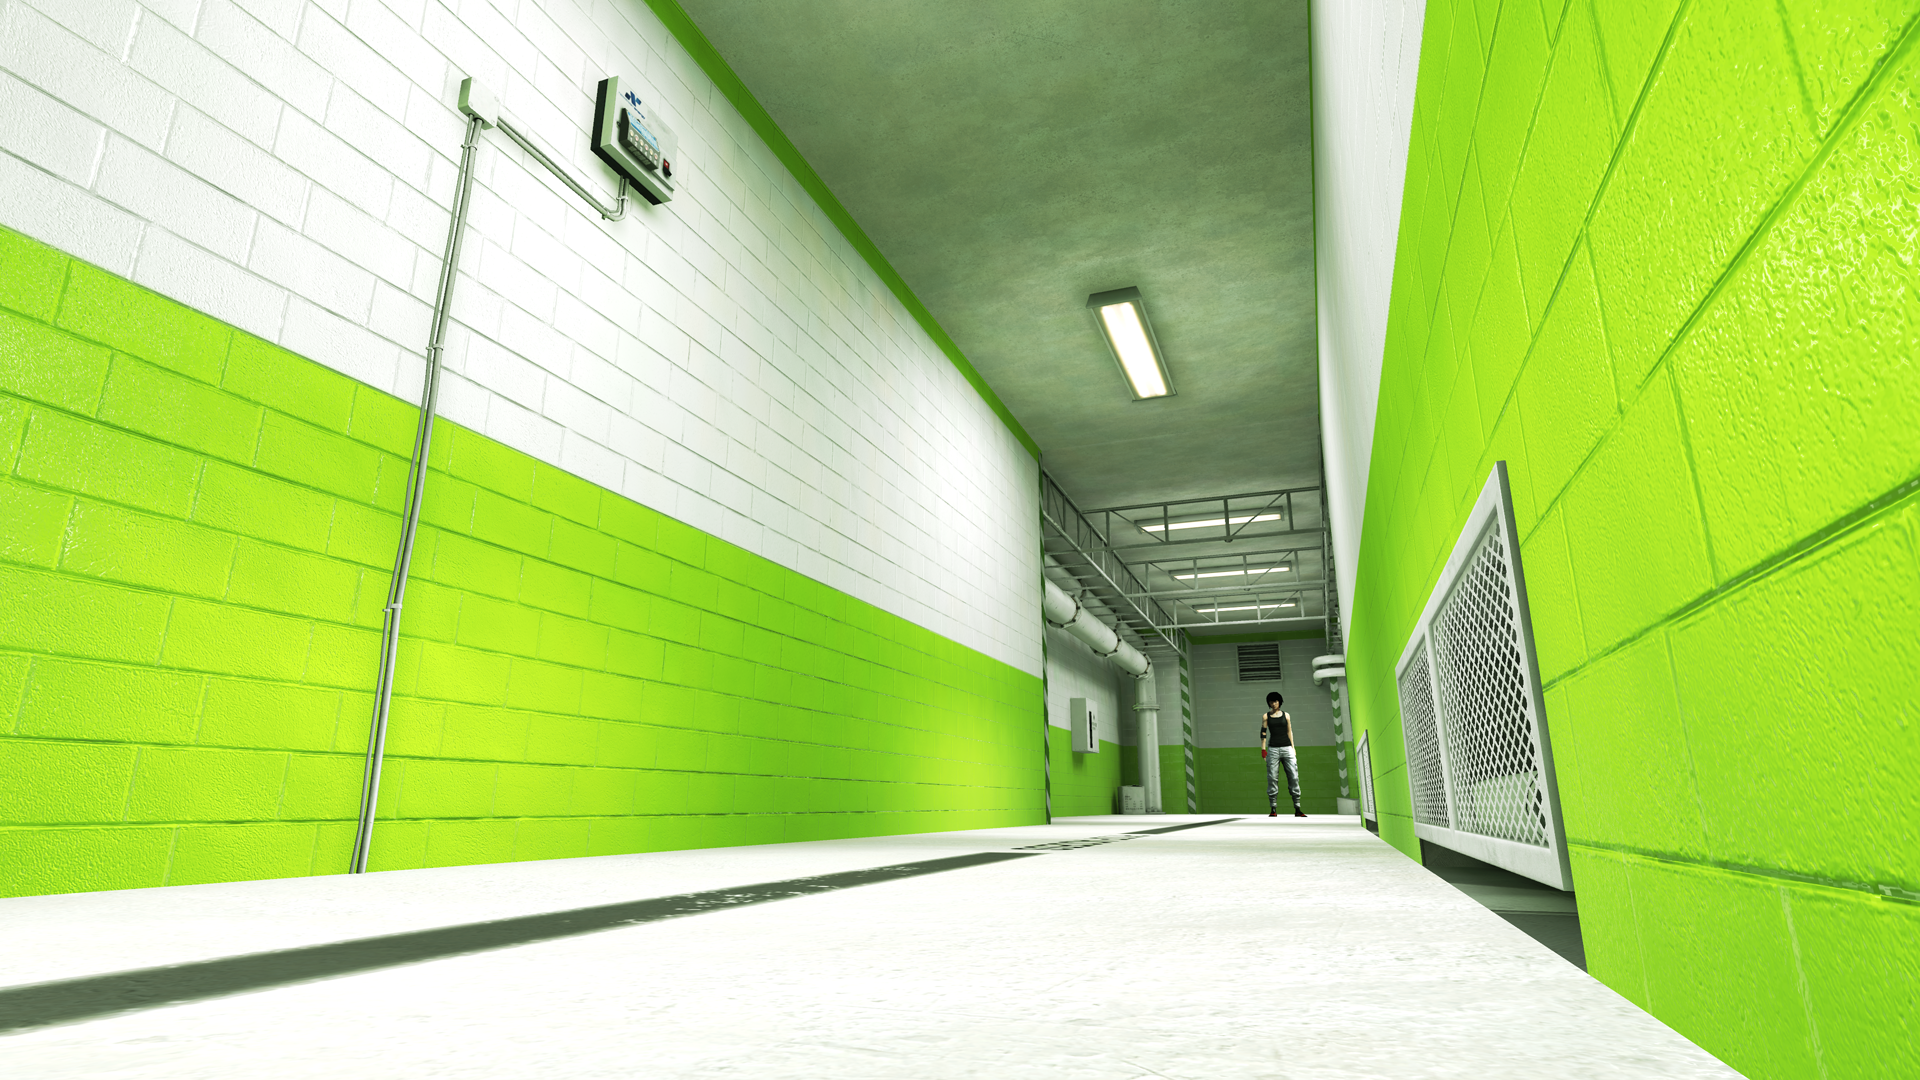 mirrorsedge_2014_01_02_00_37_54_988_by_dio141-d70fdph.png